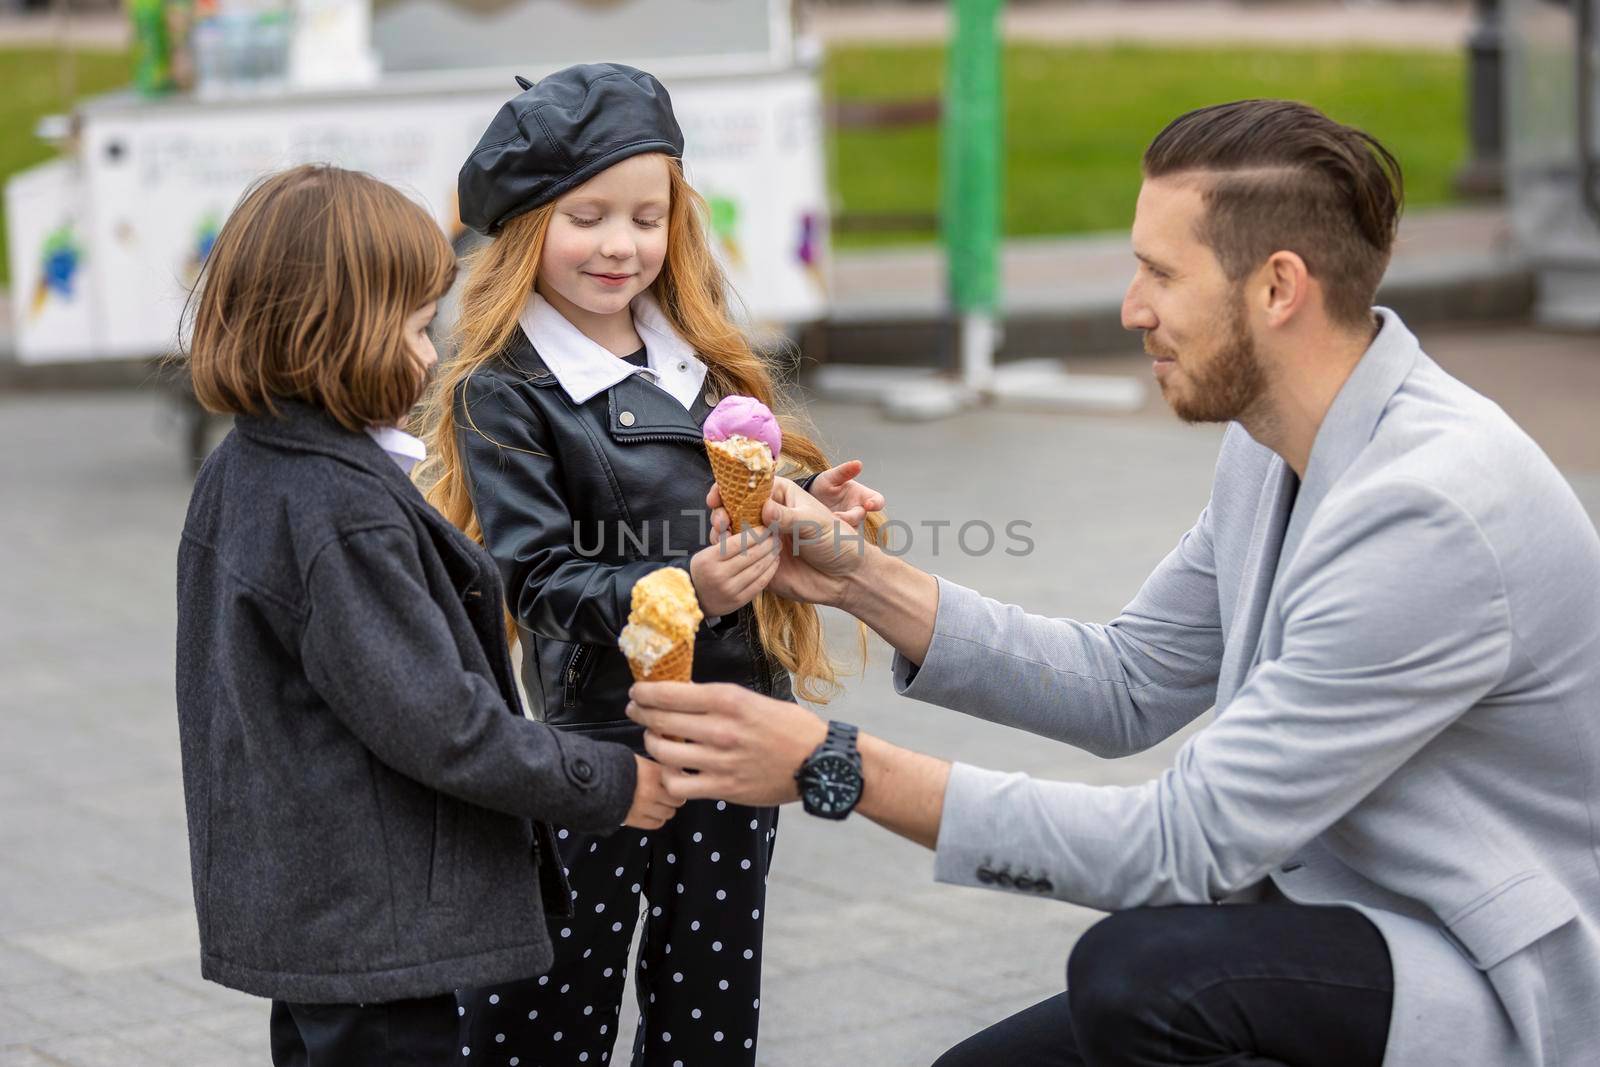 Man gives ice cream to children on the street